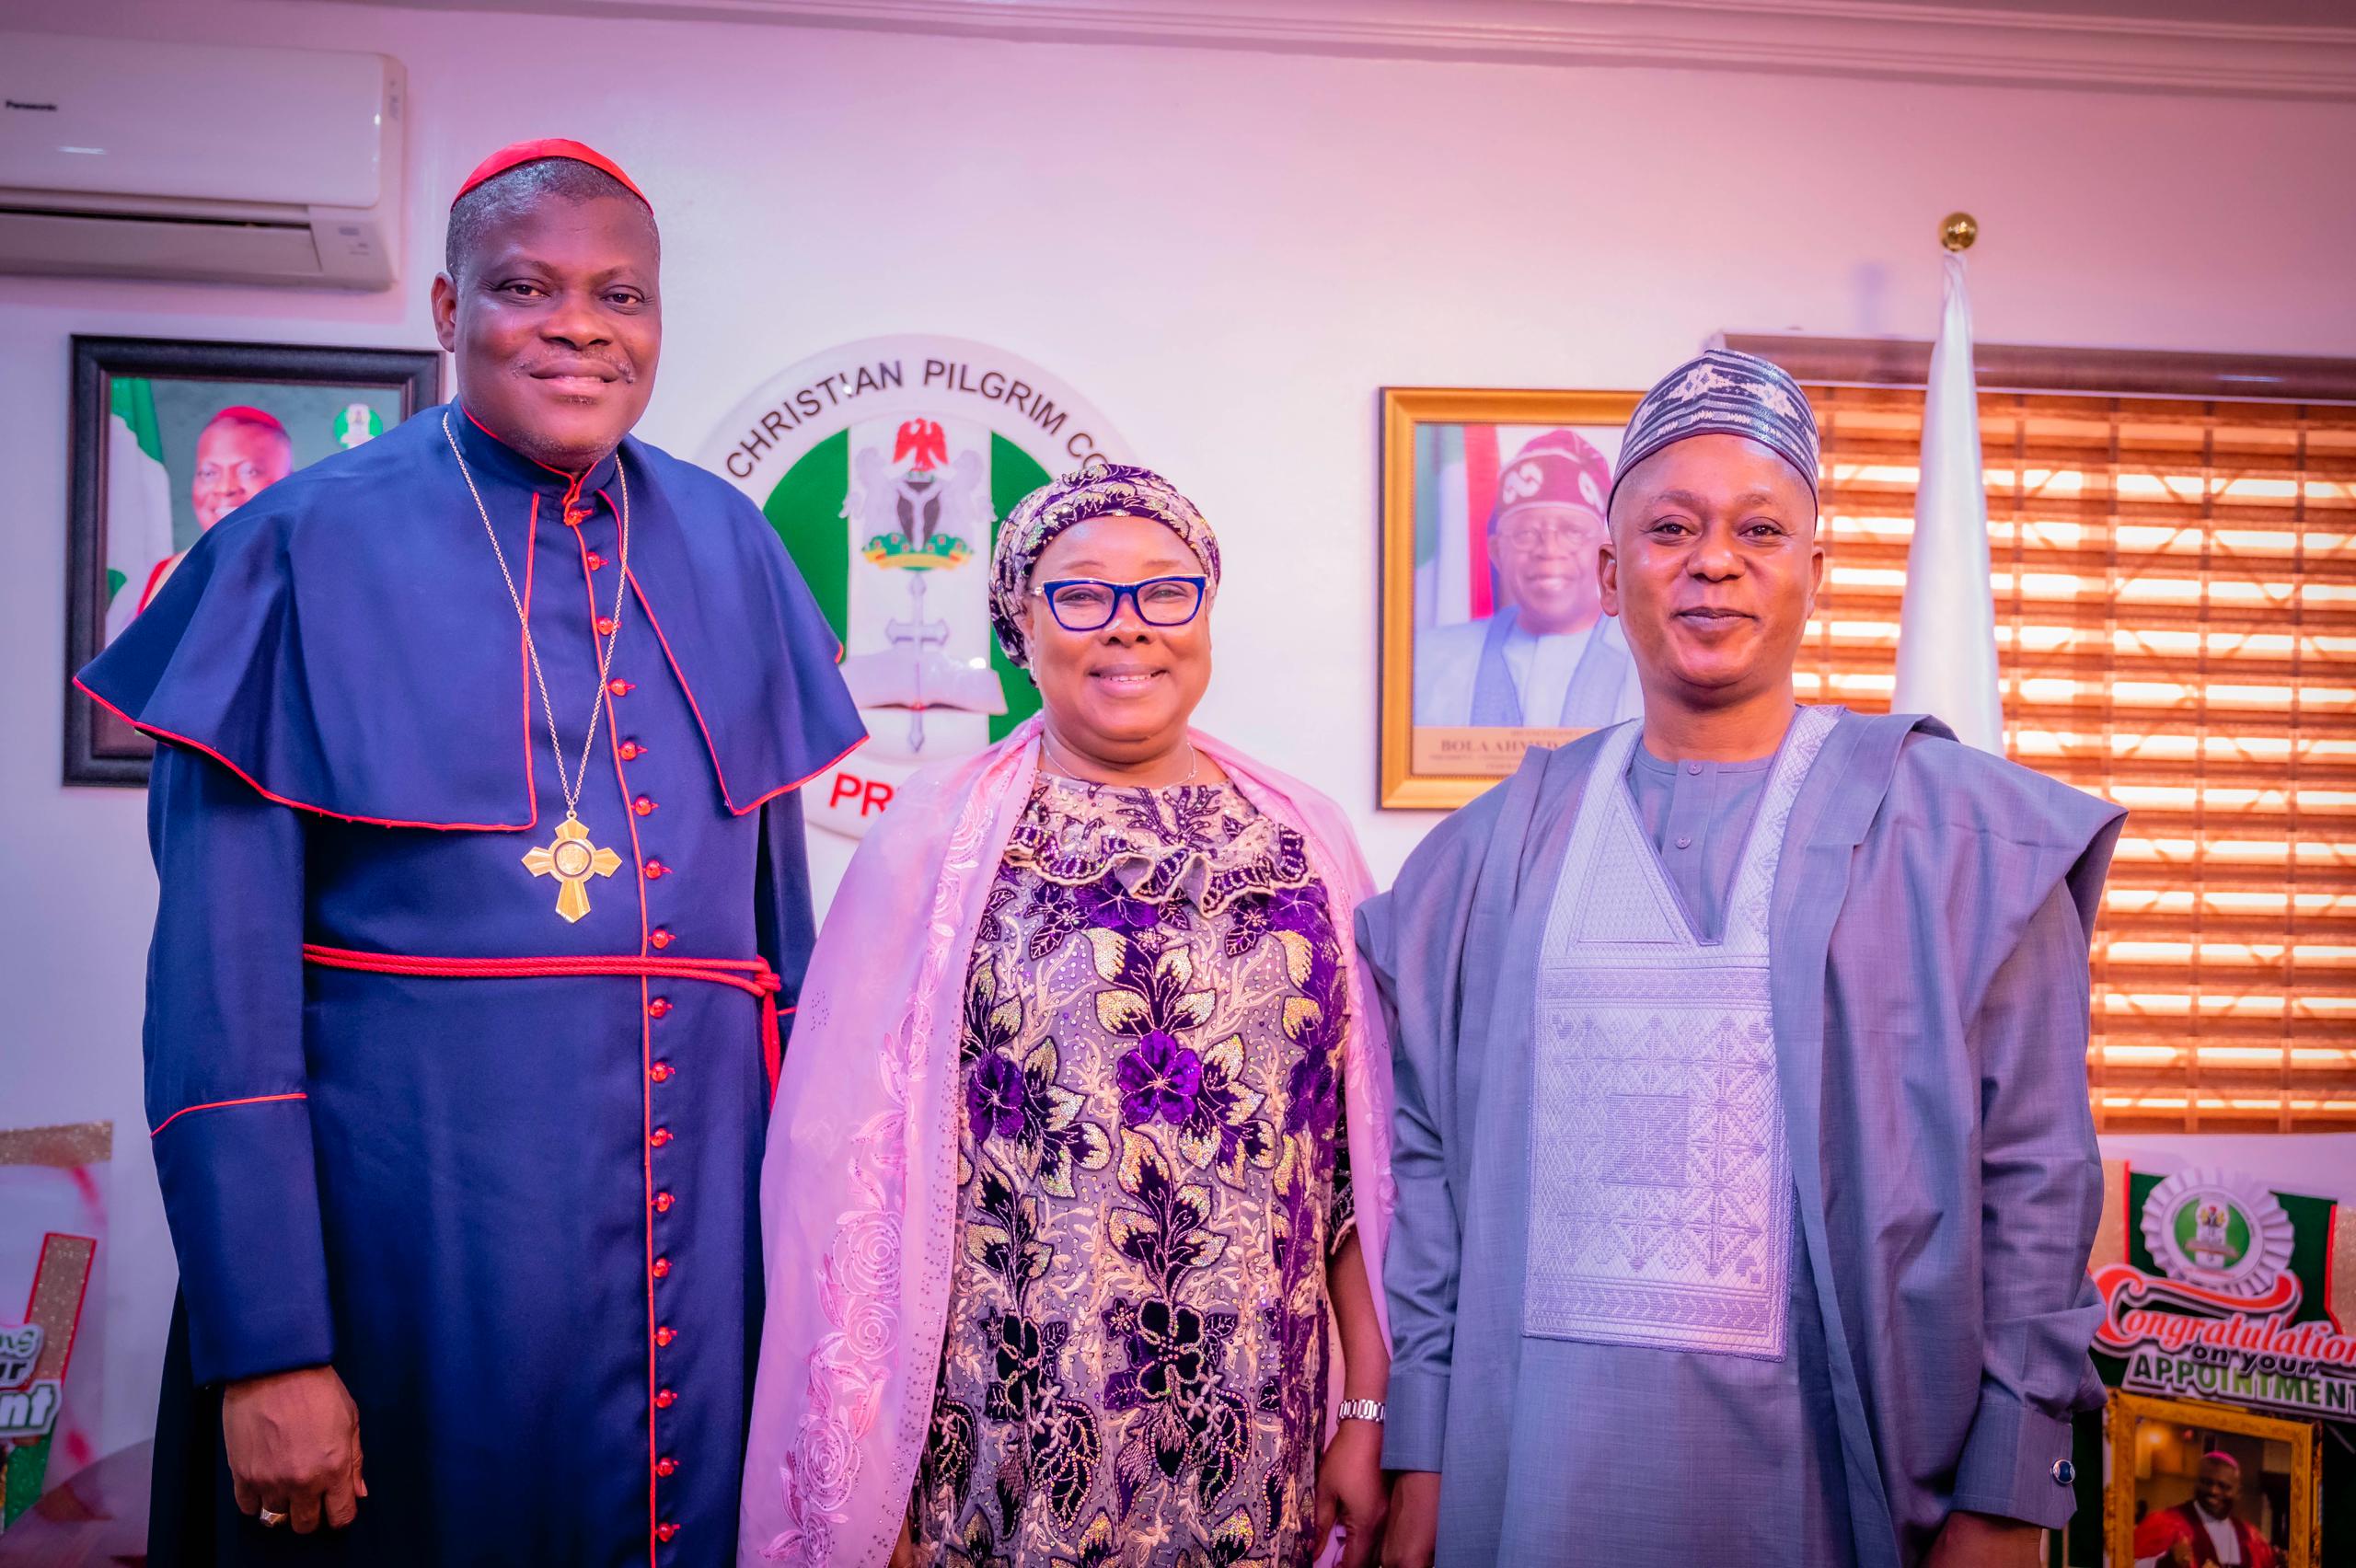 NCPC Boss, Bishop Adegbite Vows to Restore the Glory and Confidence of NCPC